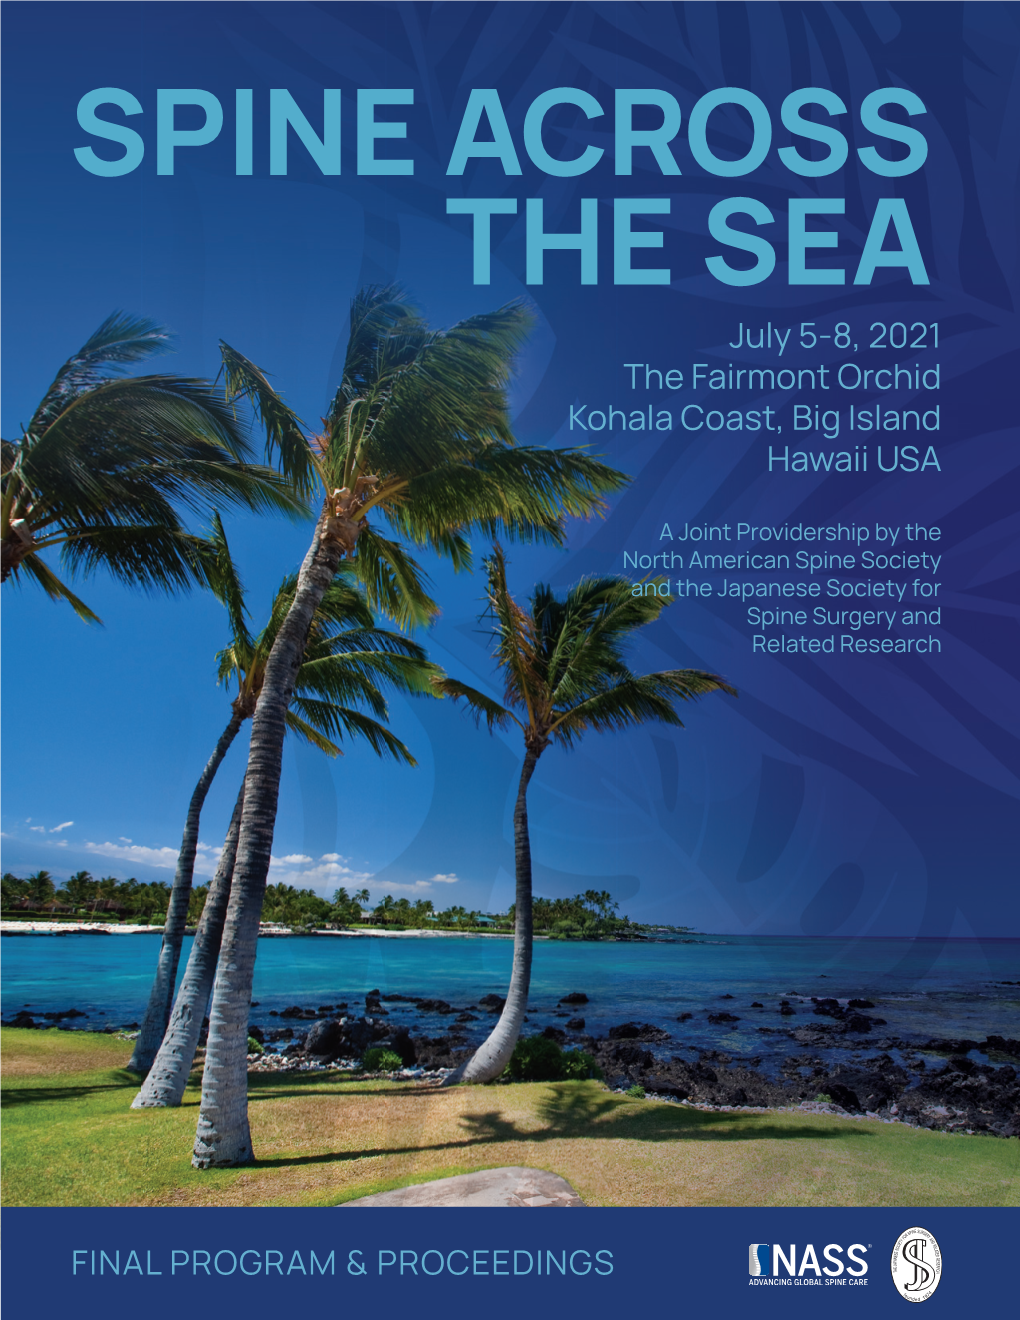 FINAL PROGRAM & PROCEEDINGS 2 Welcome to the Fairmont Orchid for Spine Across the Sea!